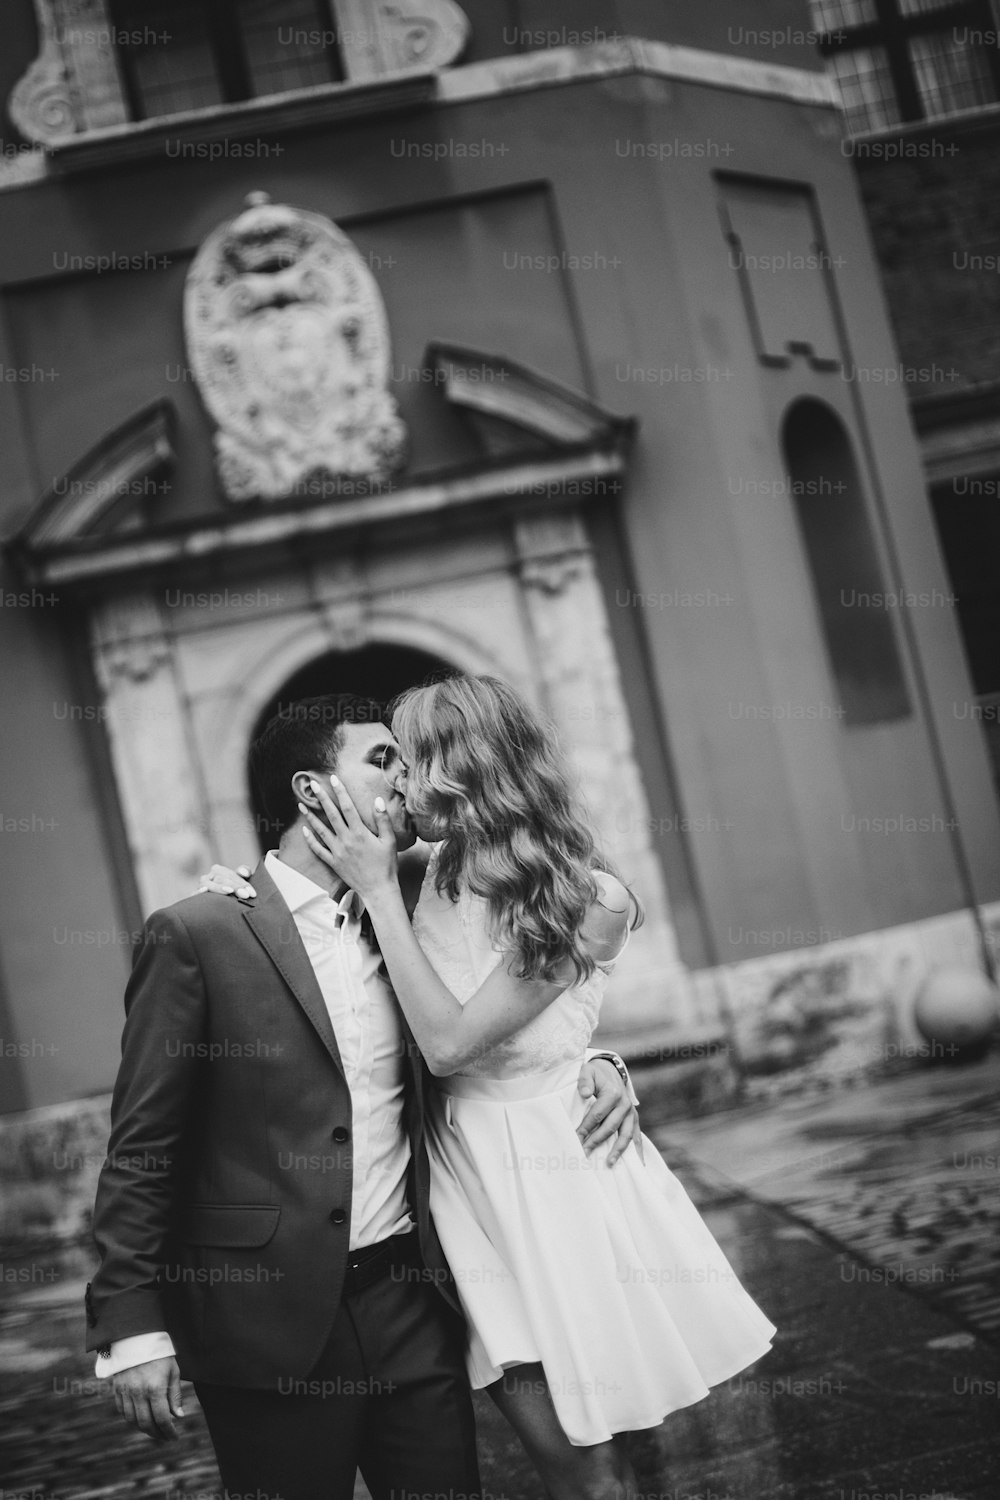 Stylish couple walking and kissing in european city street on background of old architecture. Fashionable bride and groom in love enjoying day, embracing in city. Traveling together in Europe